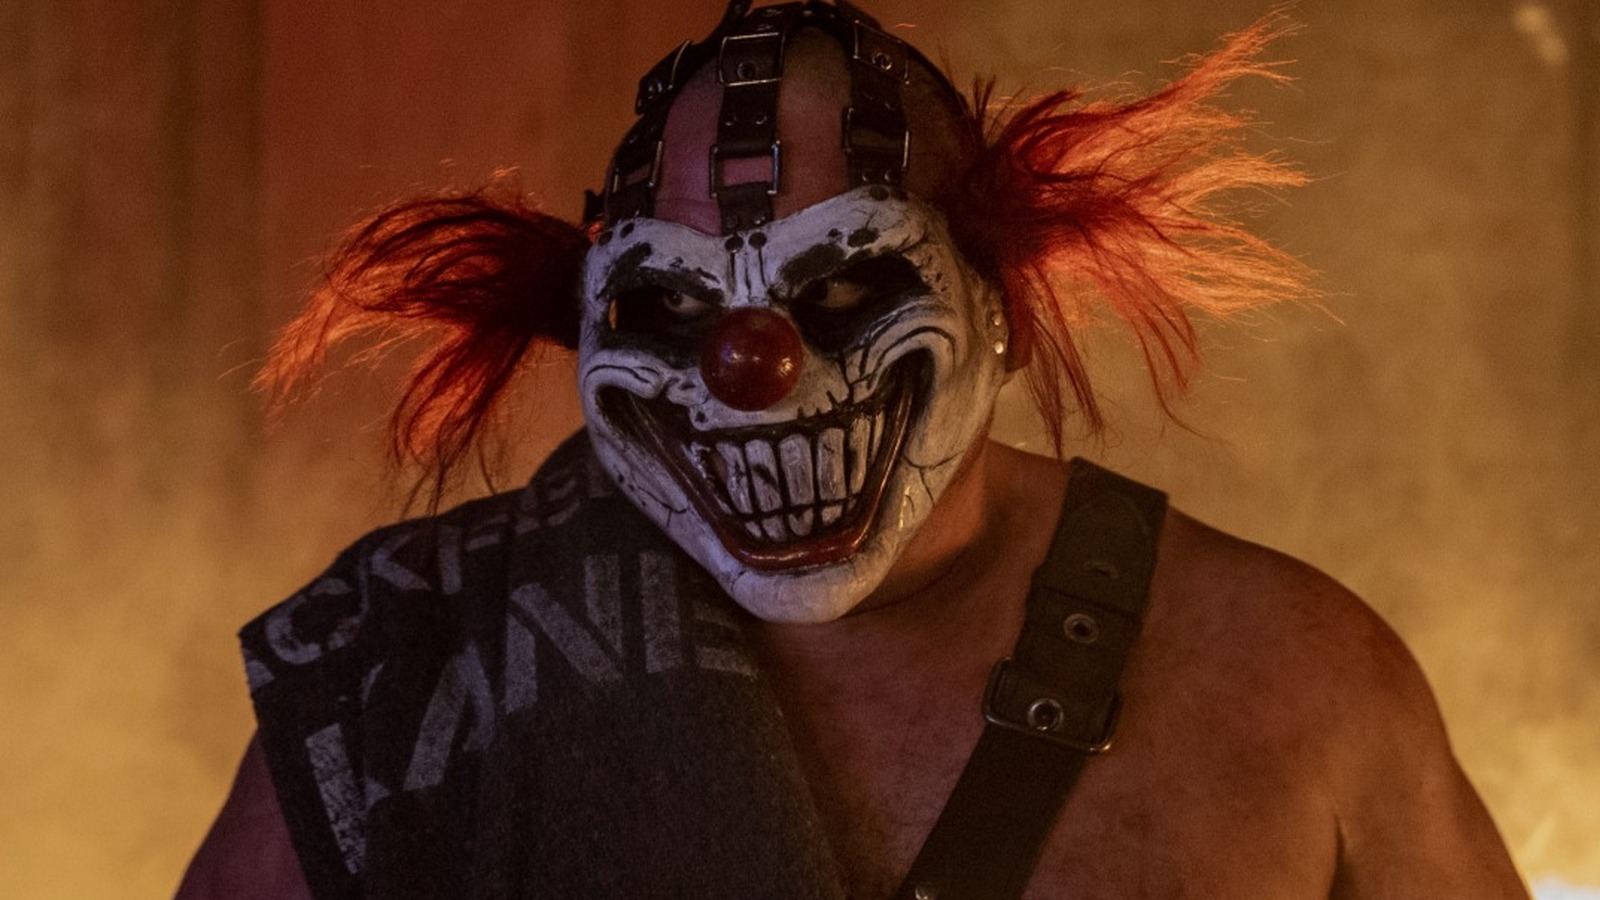 Even More Twisted Lore Of Twisted Metal: The Other Characters 